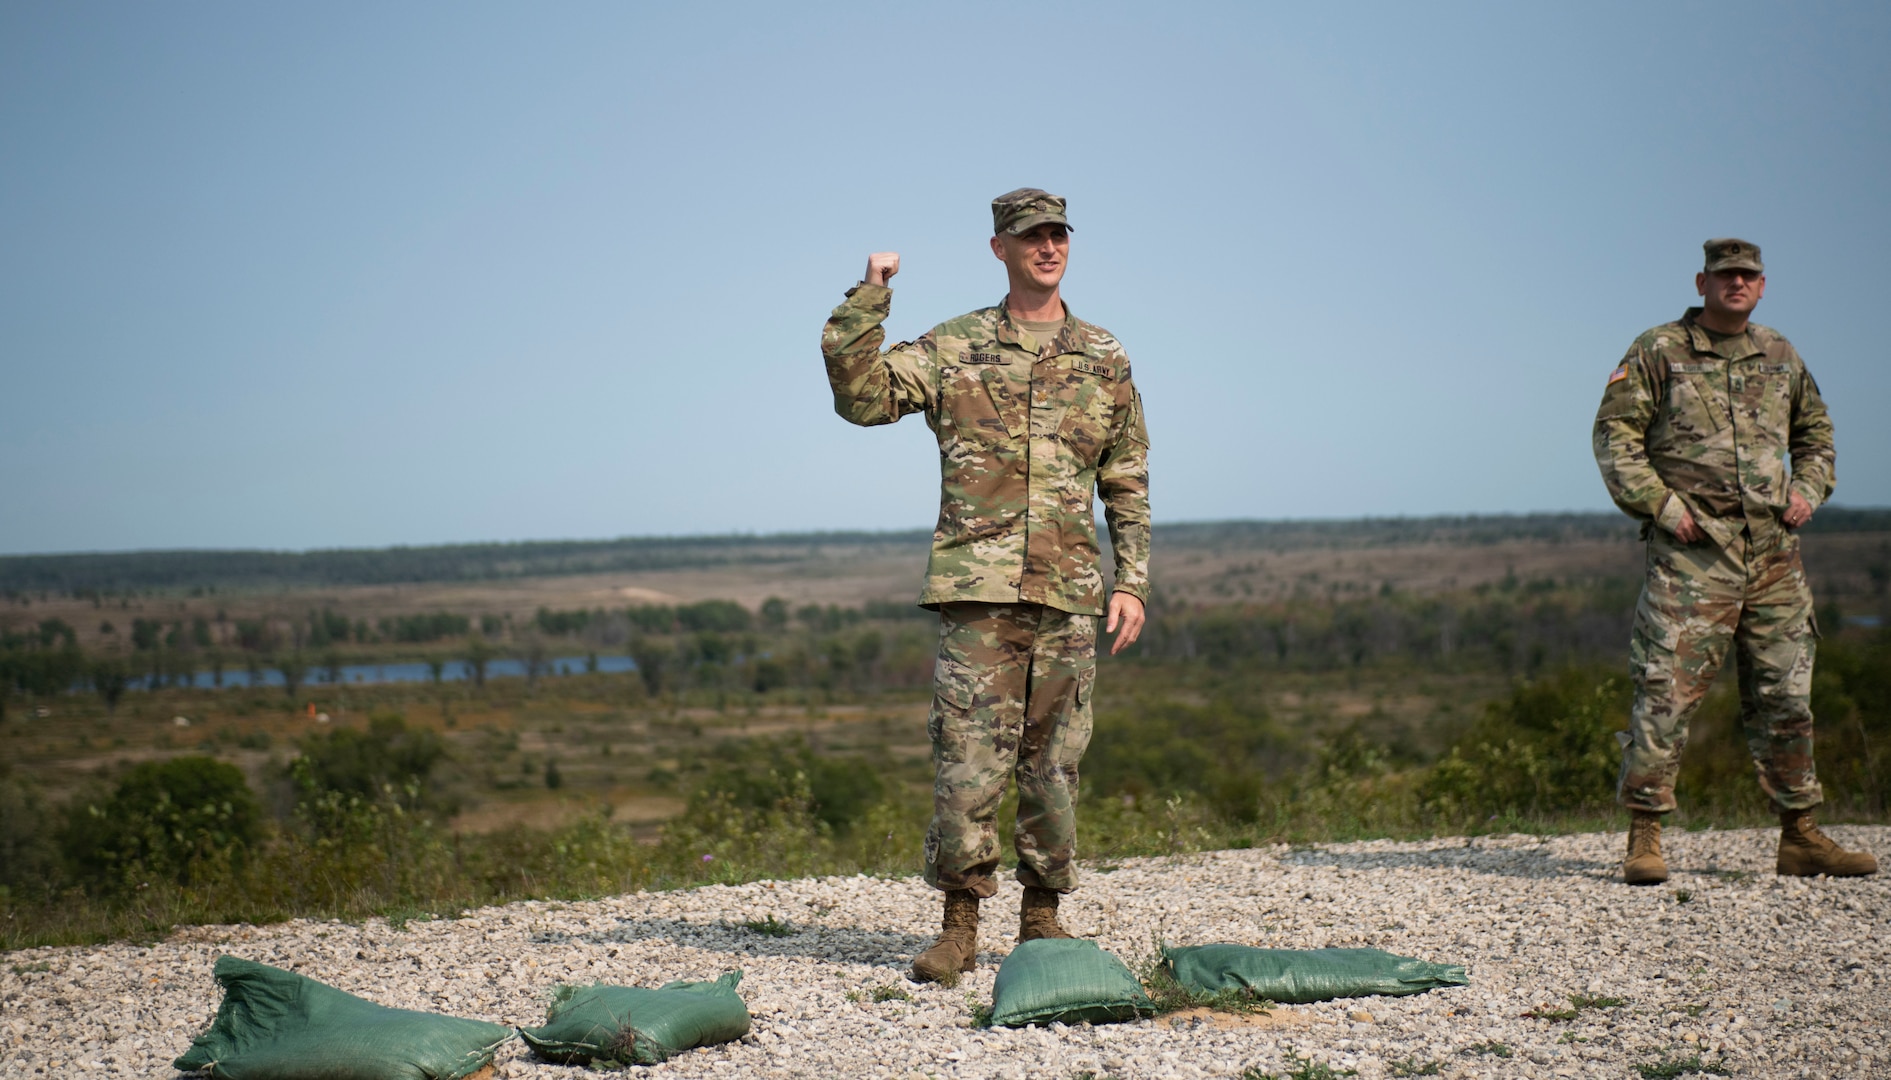 Camp Grayling hosts a pre-deployment site survey, attended by more than 30 representatives from multiple services and states,  to demonstrate the base’s training capabilities. Maj. Quinn Rodgers, director of operations for Camp Grayling, showcased the base’s 148,000 acres of training space.